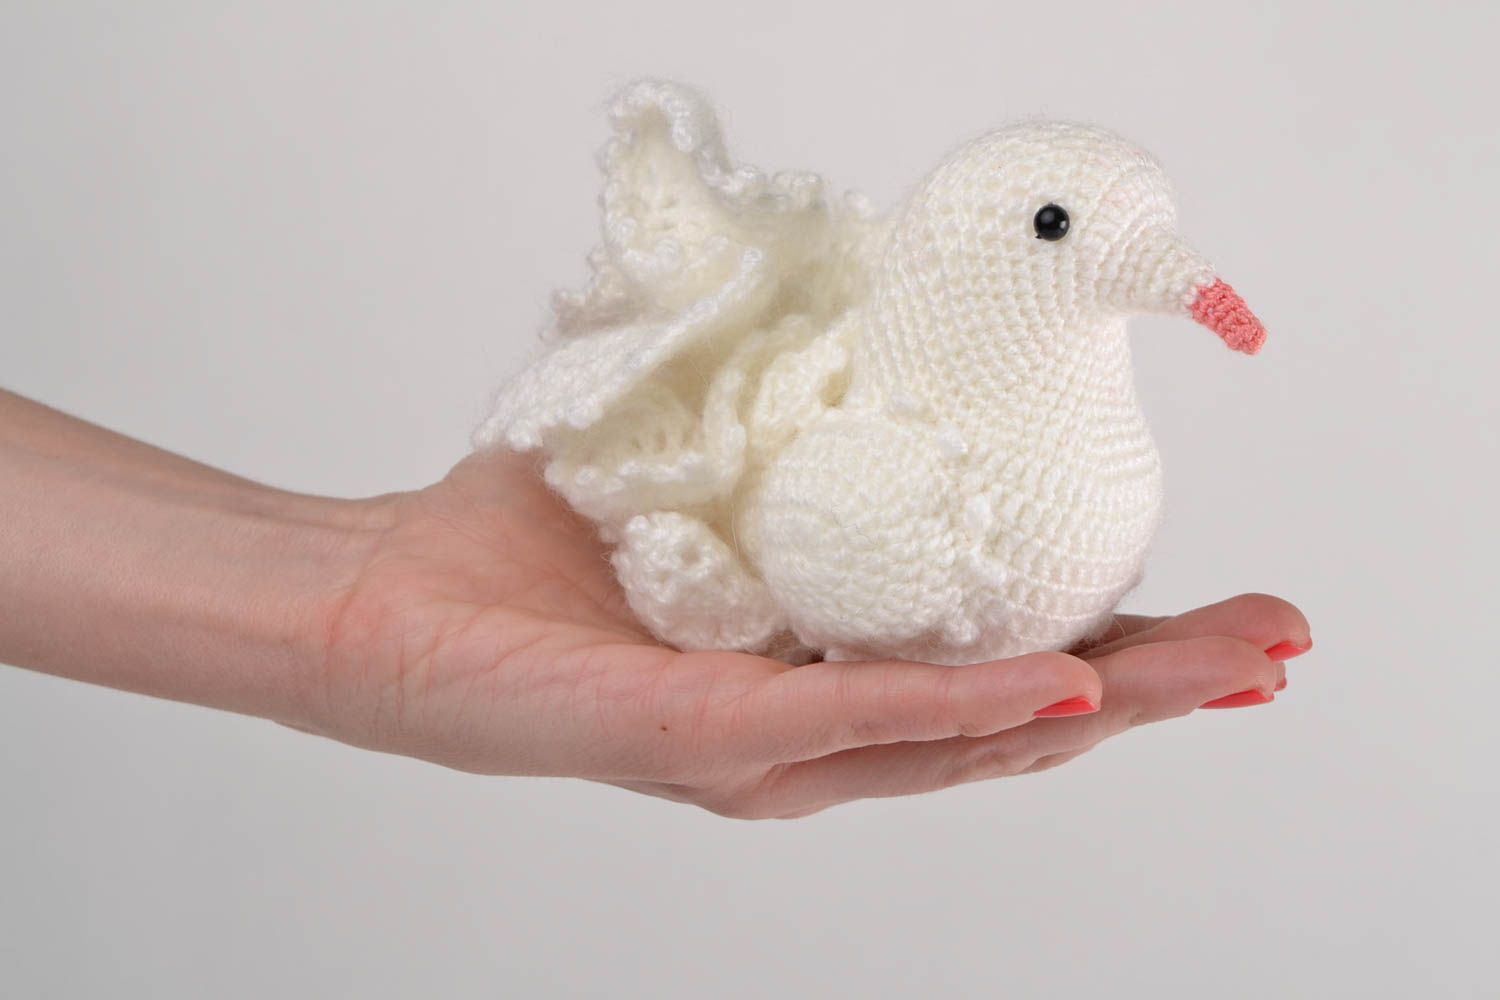 Handmade soft toy crocheted of acrylic threads white dove for interior decor photo 2